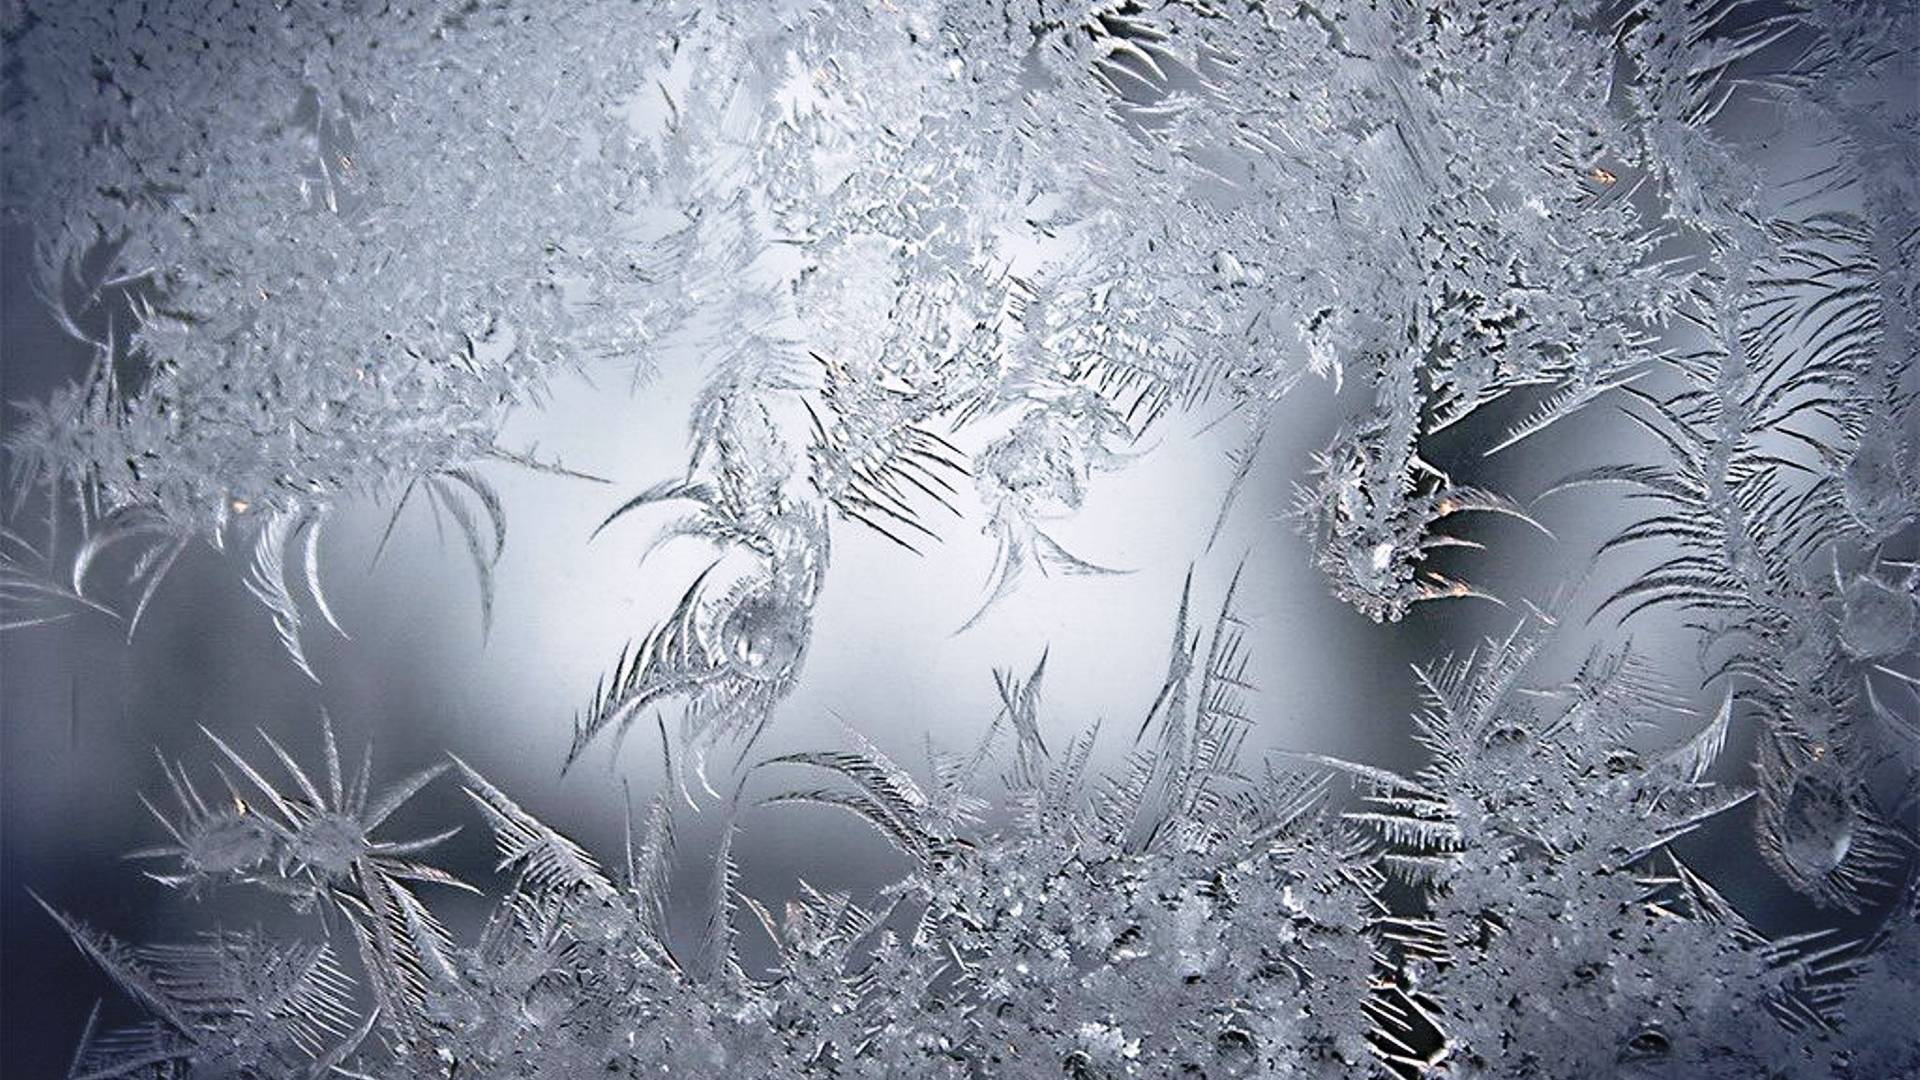 Wallpapers glass icing ice on the desktop